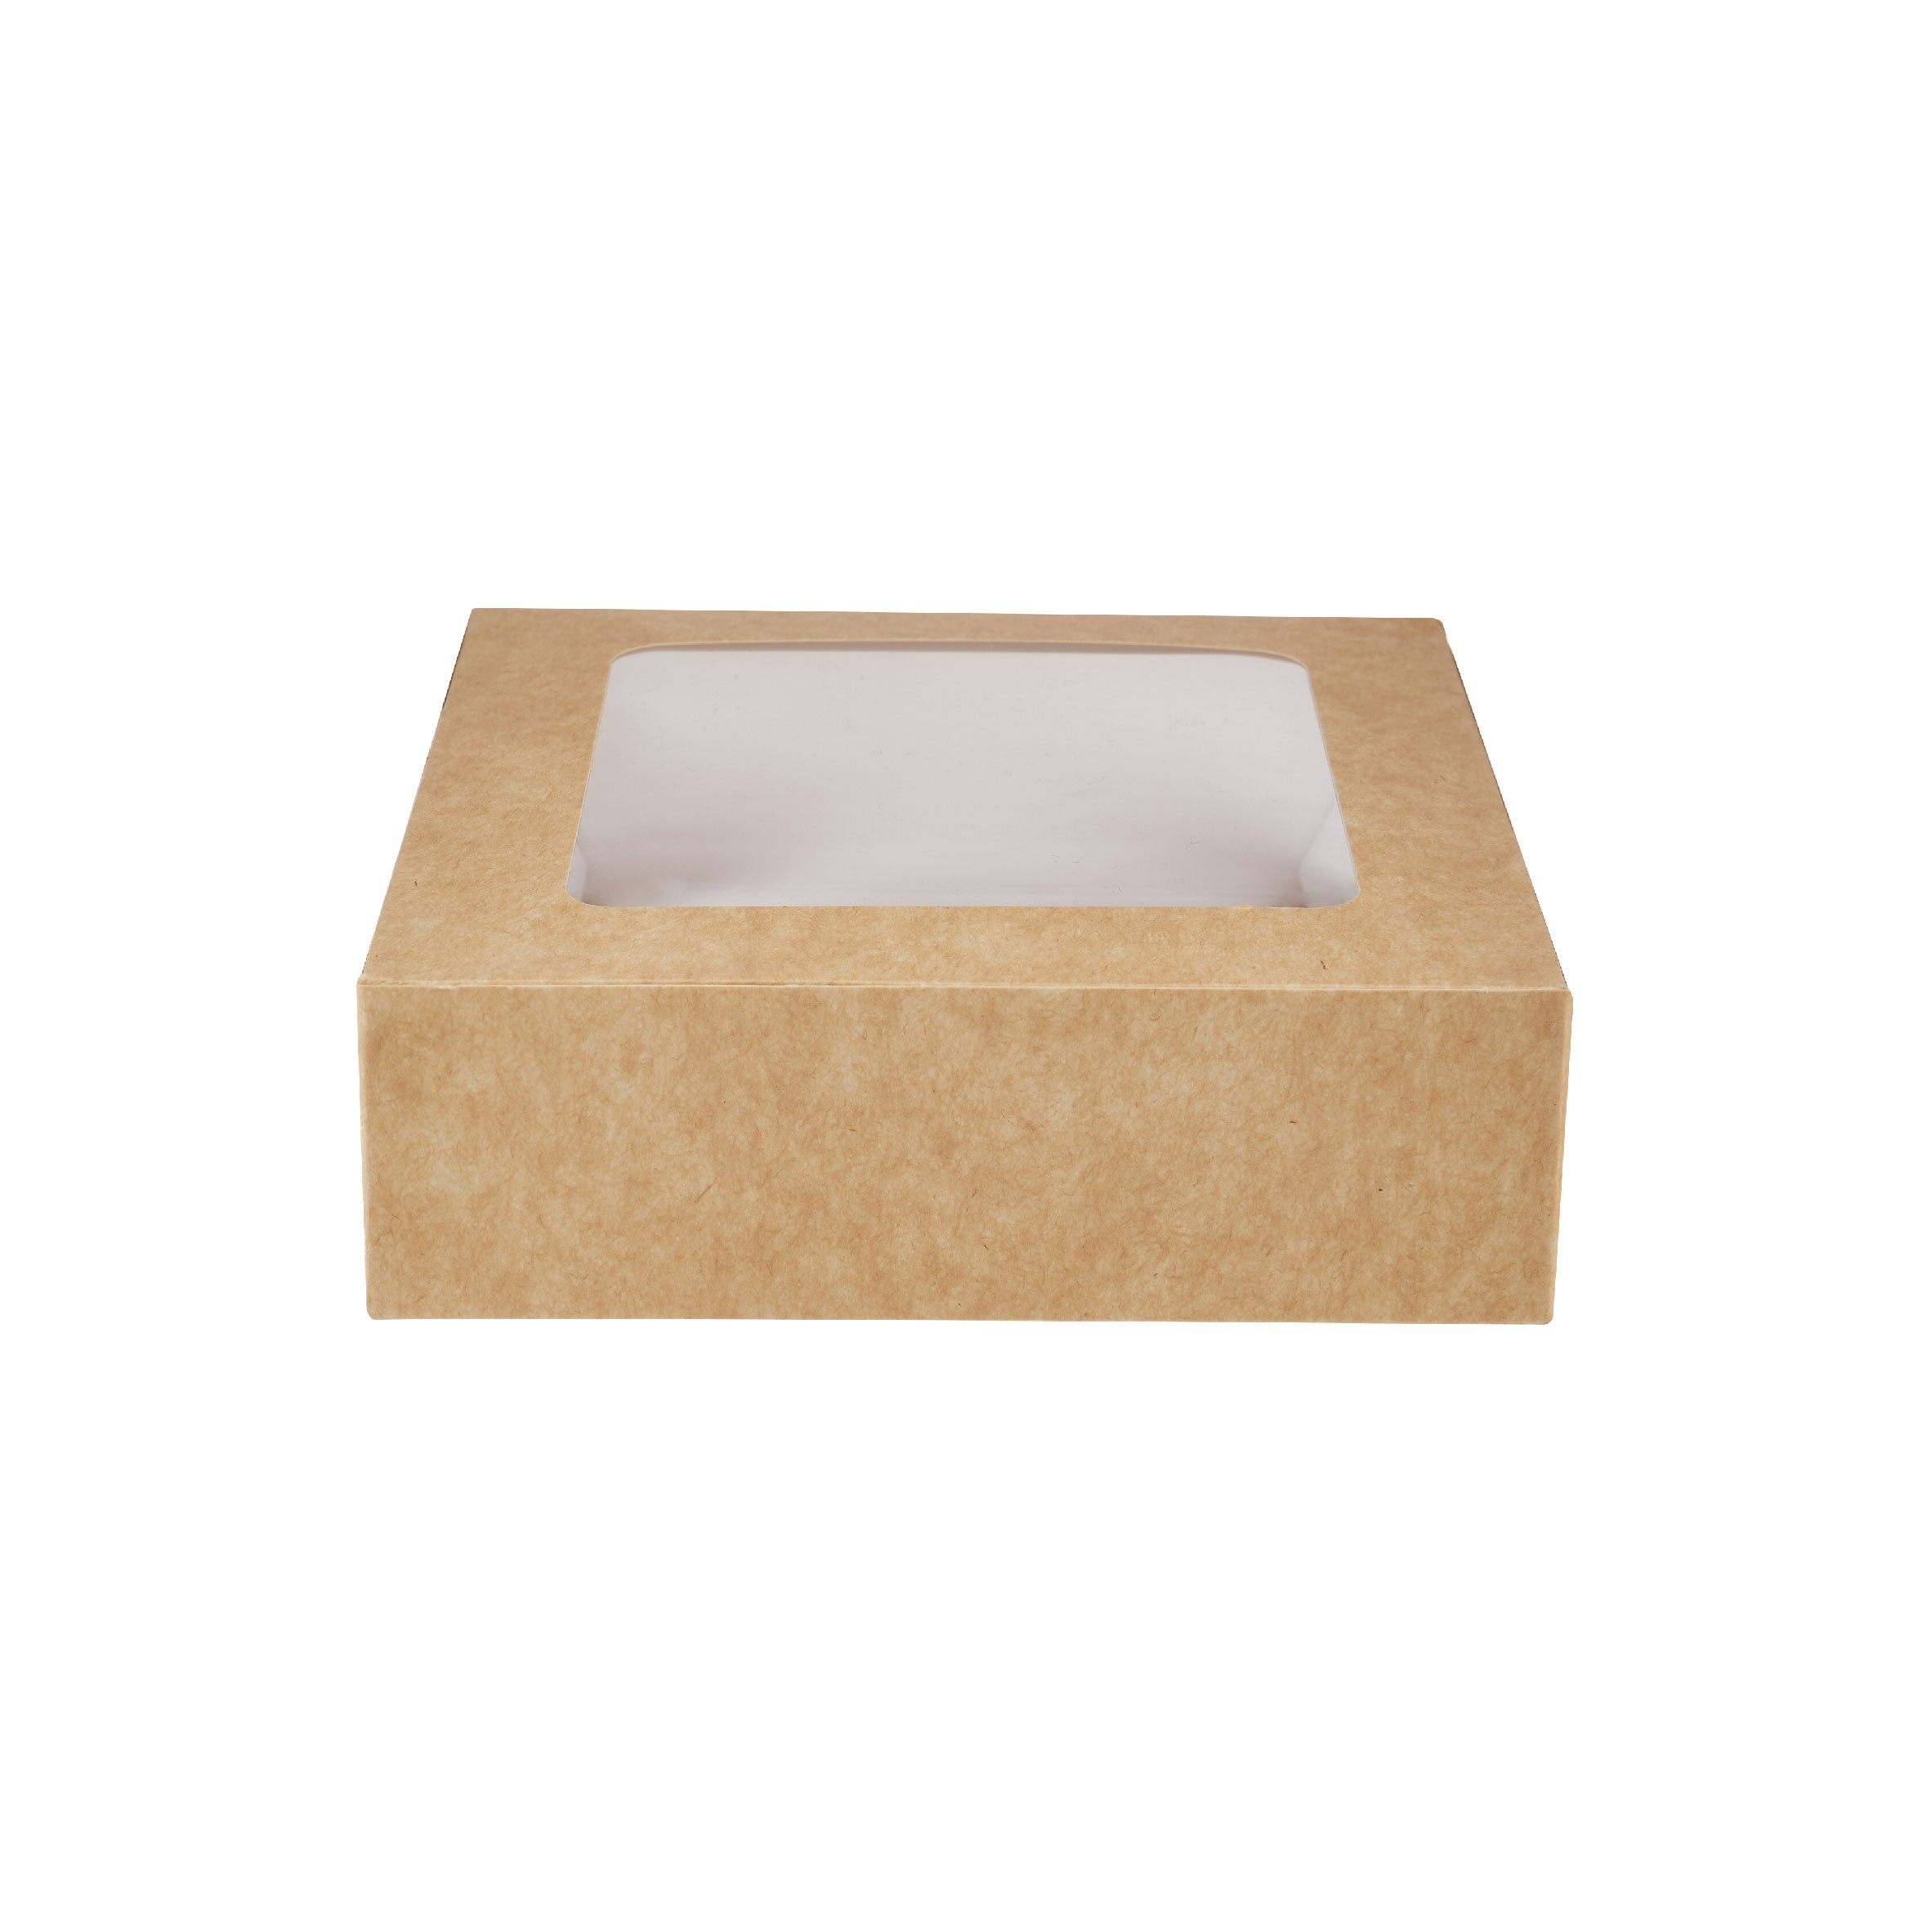 KRAFT SQUARE SALAD BOX 125 x 125 MM WITH WINDOW 250 Pieces - Hotpack Oman